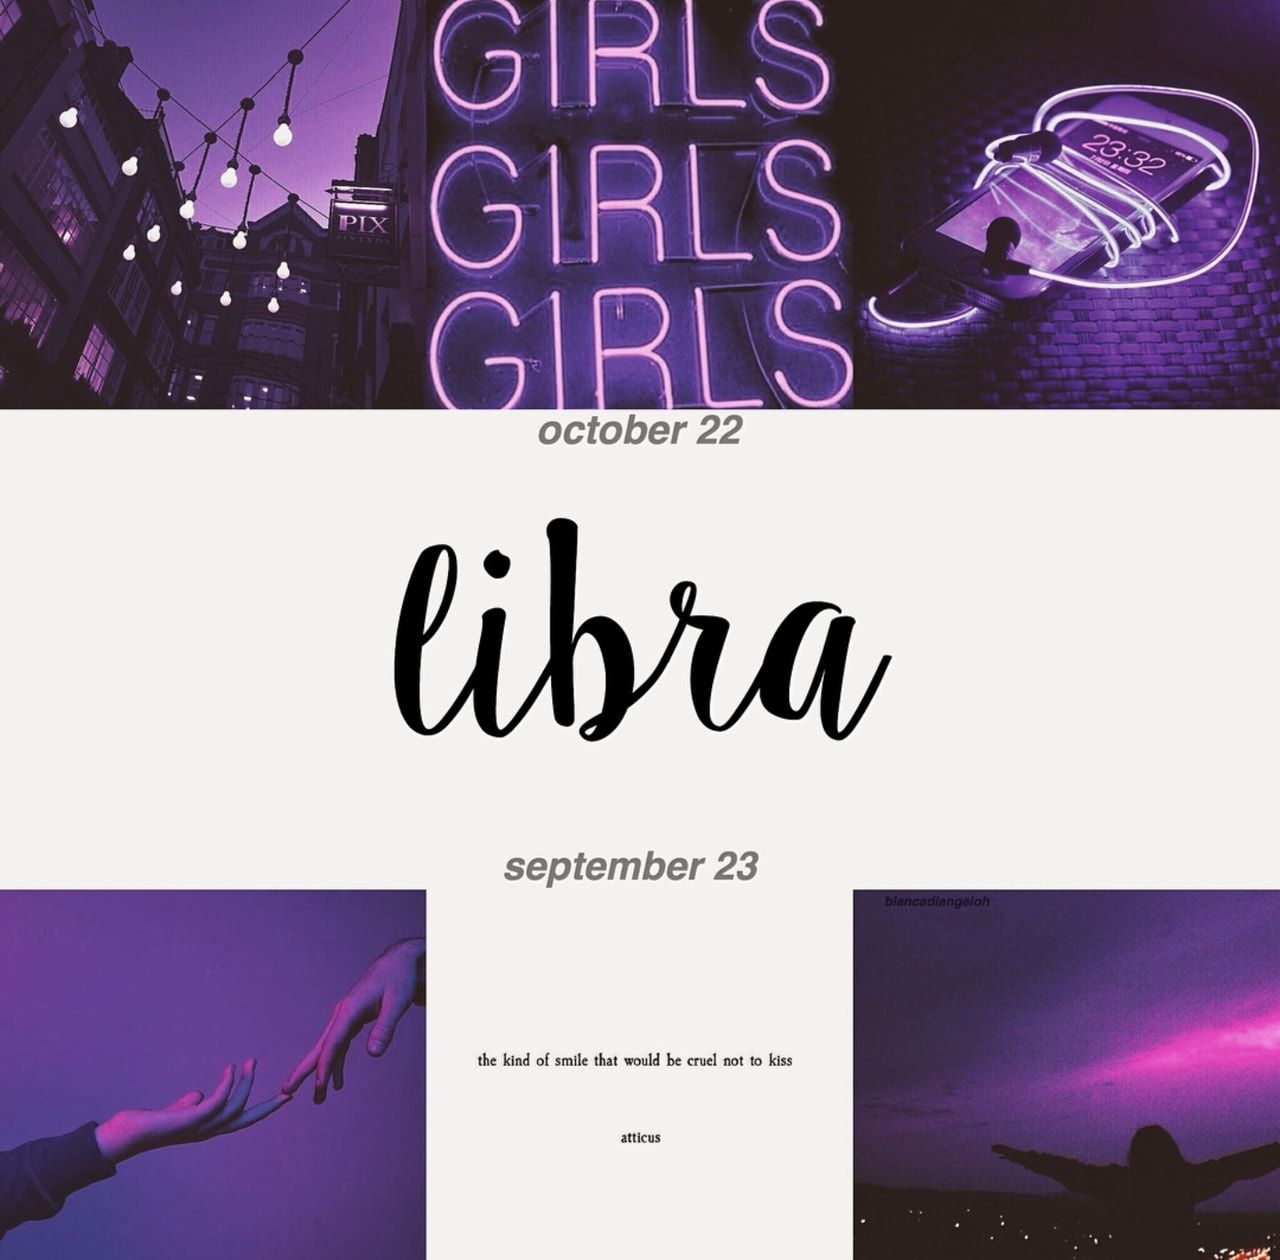 84 image about Libra ♎️